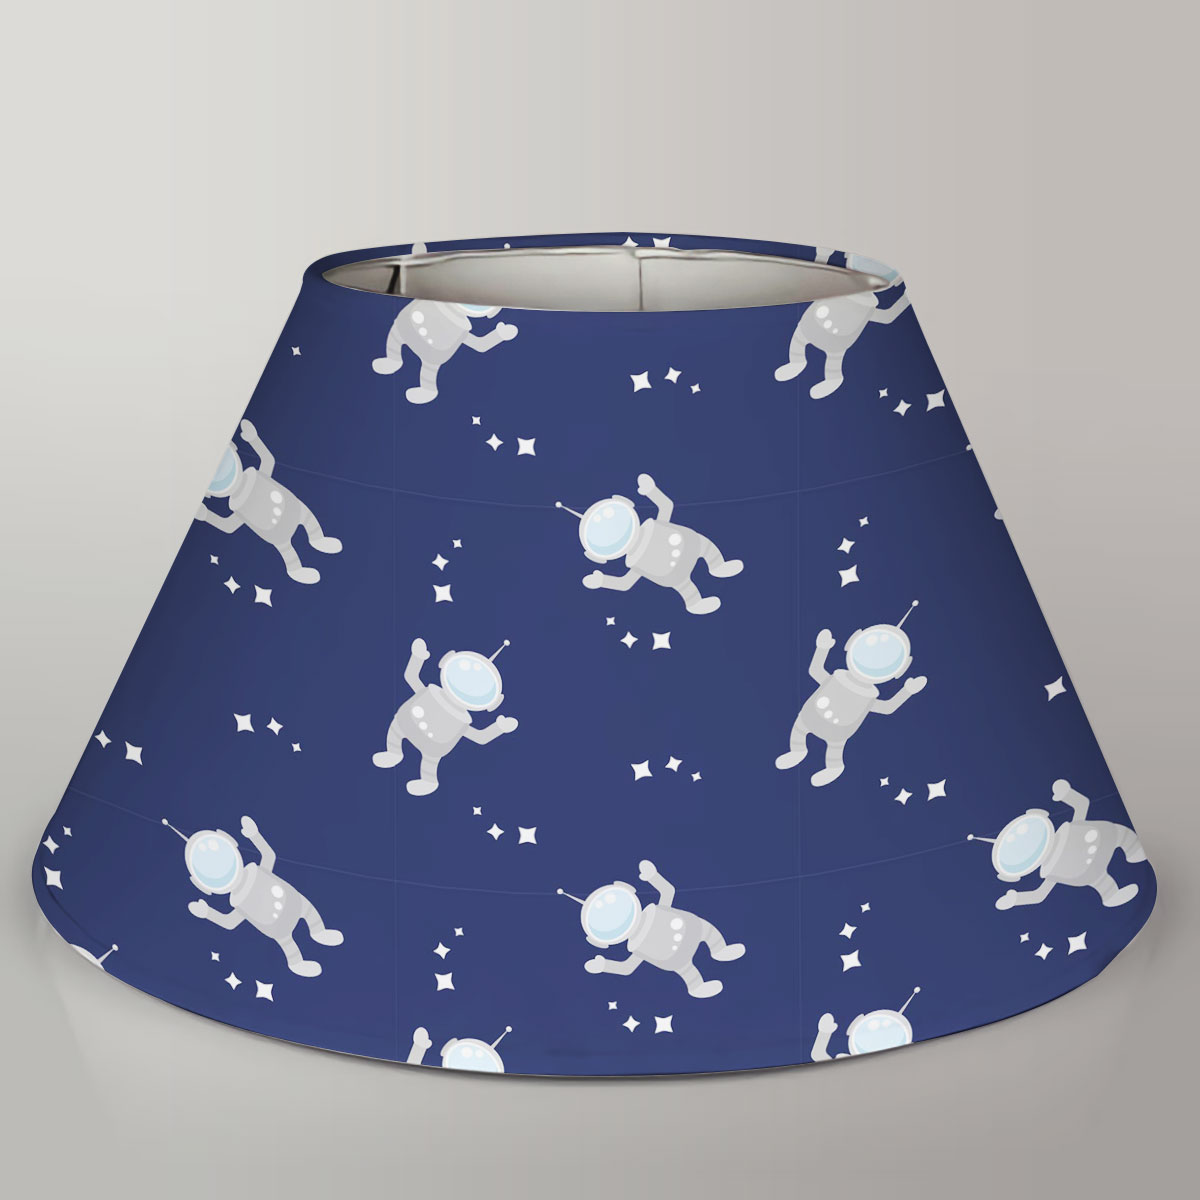 Astronauts Characters Lamp Cover